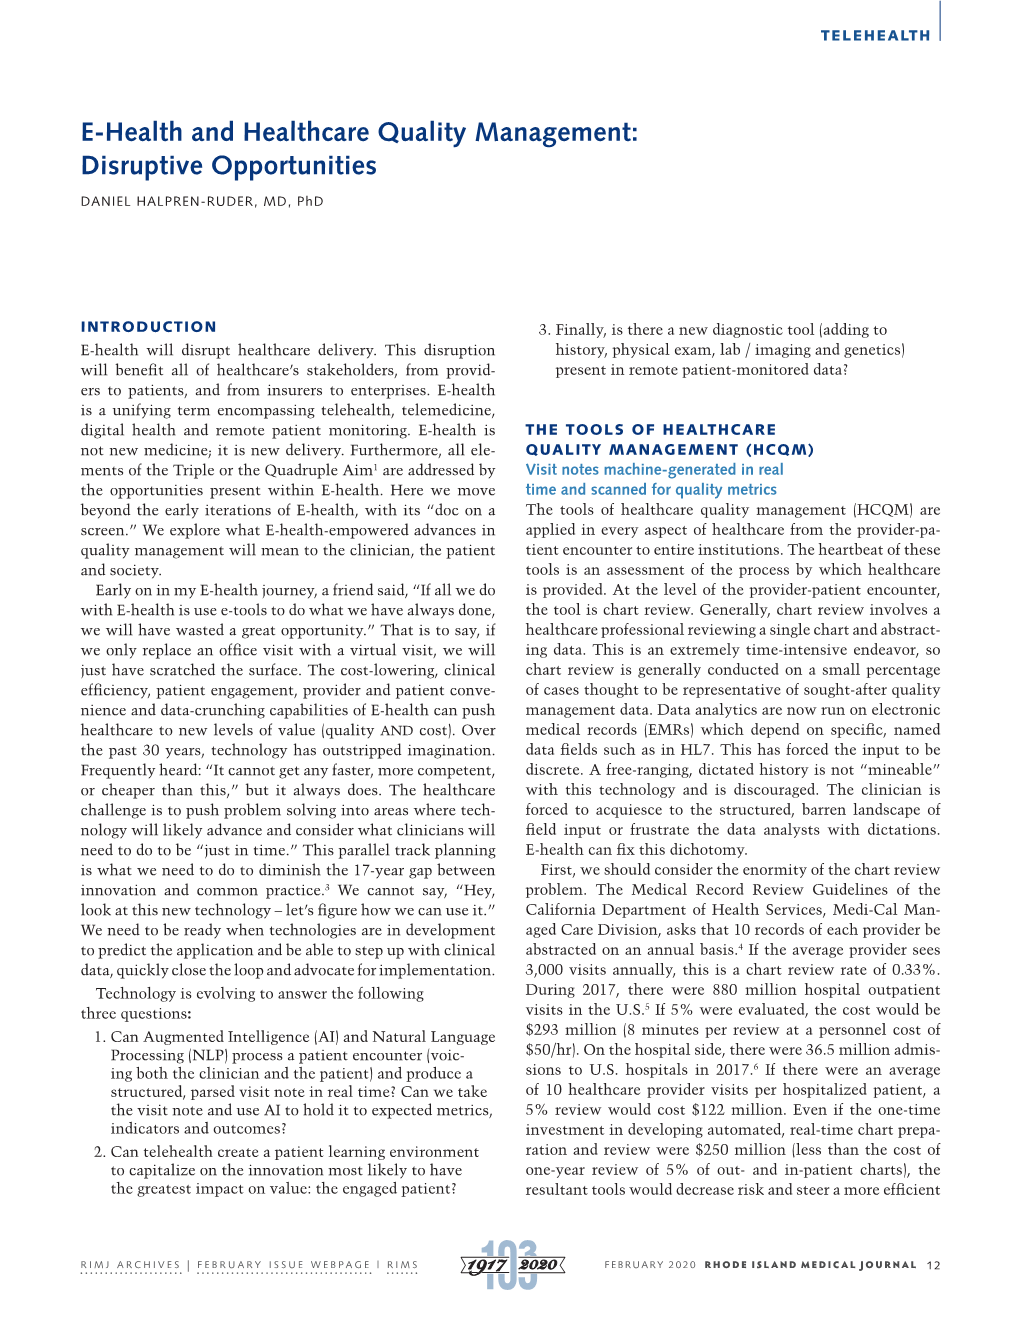 E-Health and Healthcare Quality Management: Disruptive Opportunities